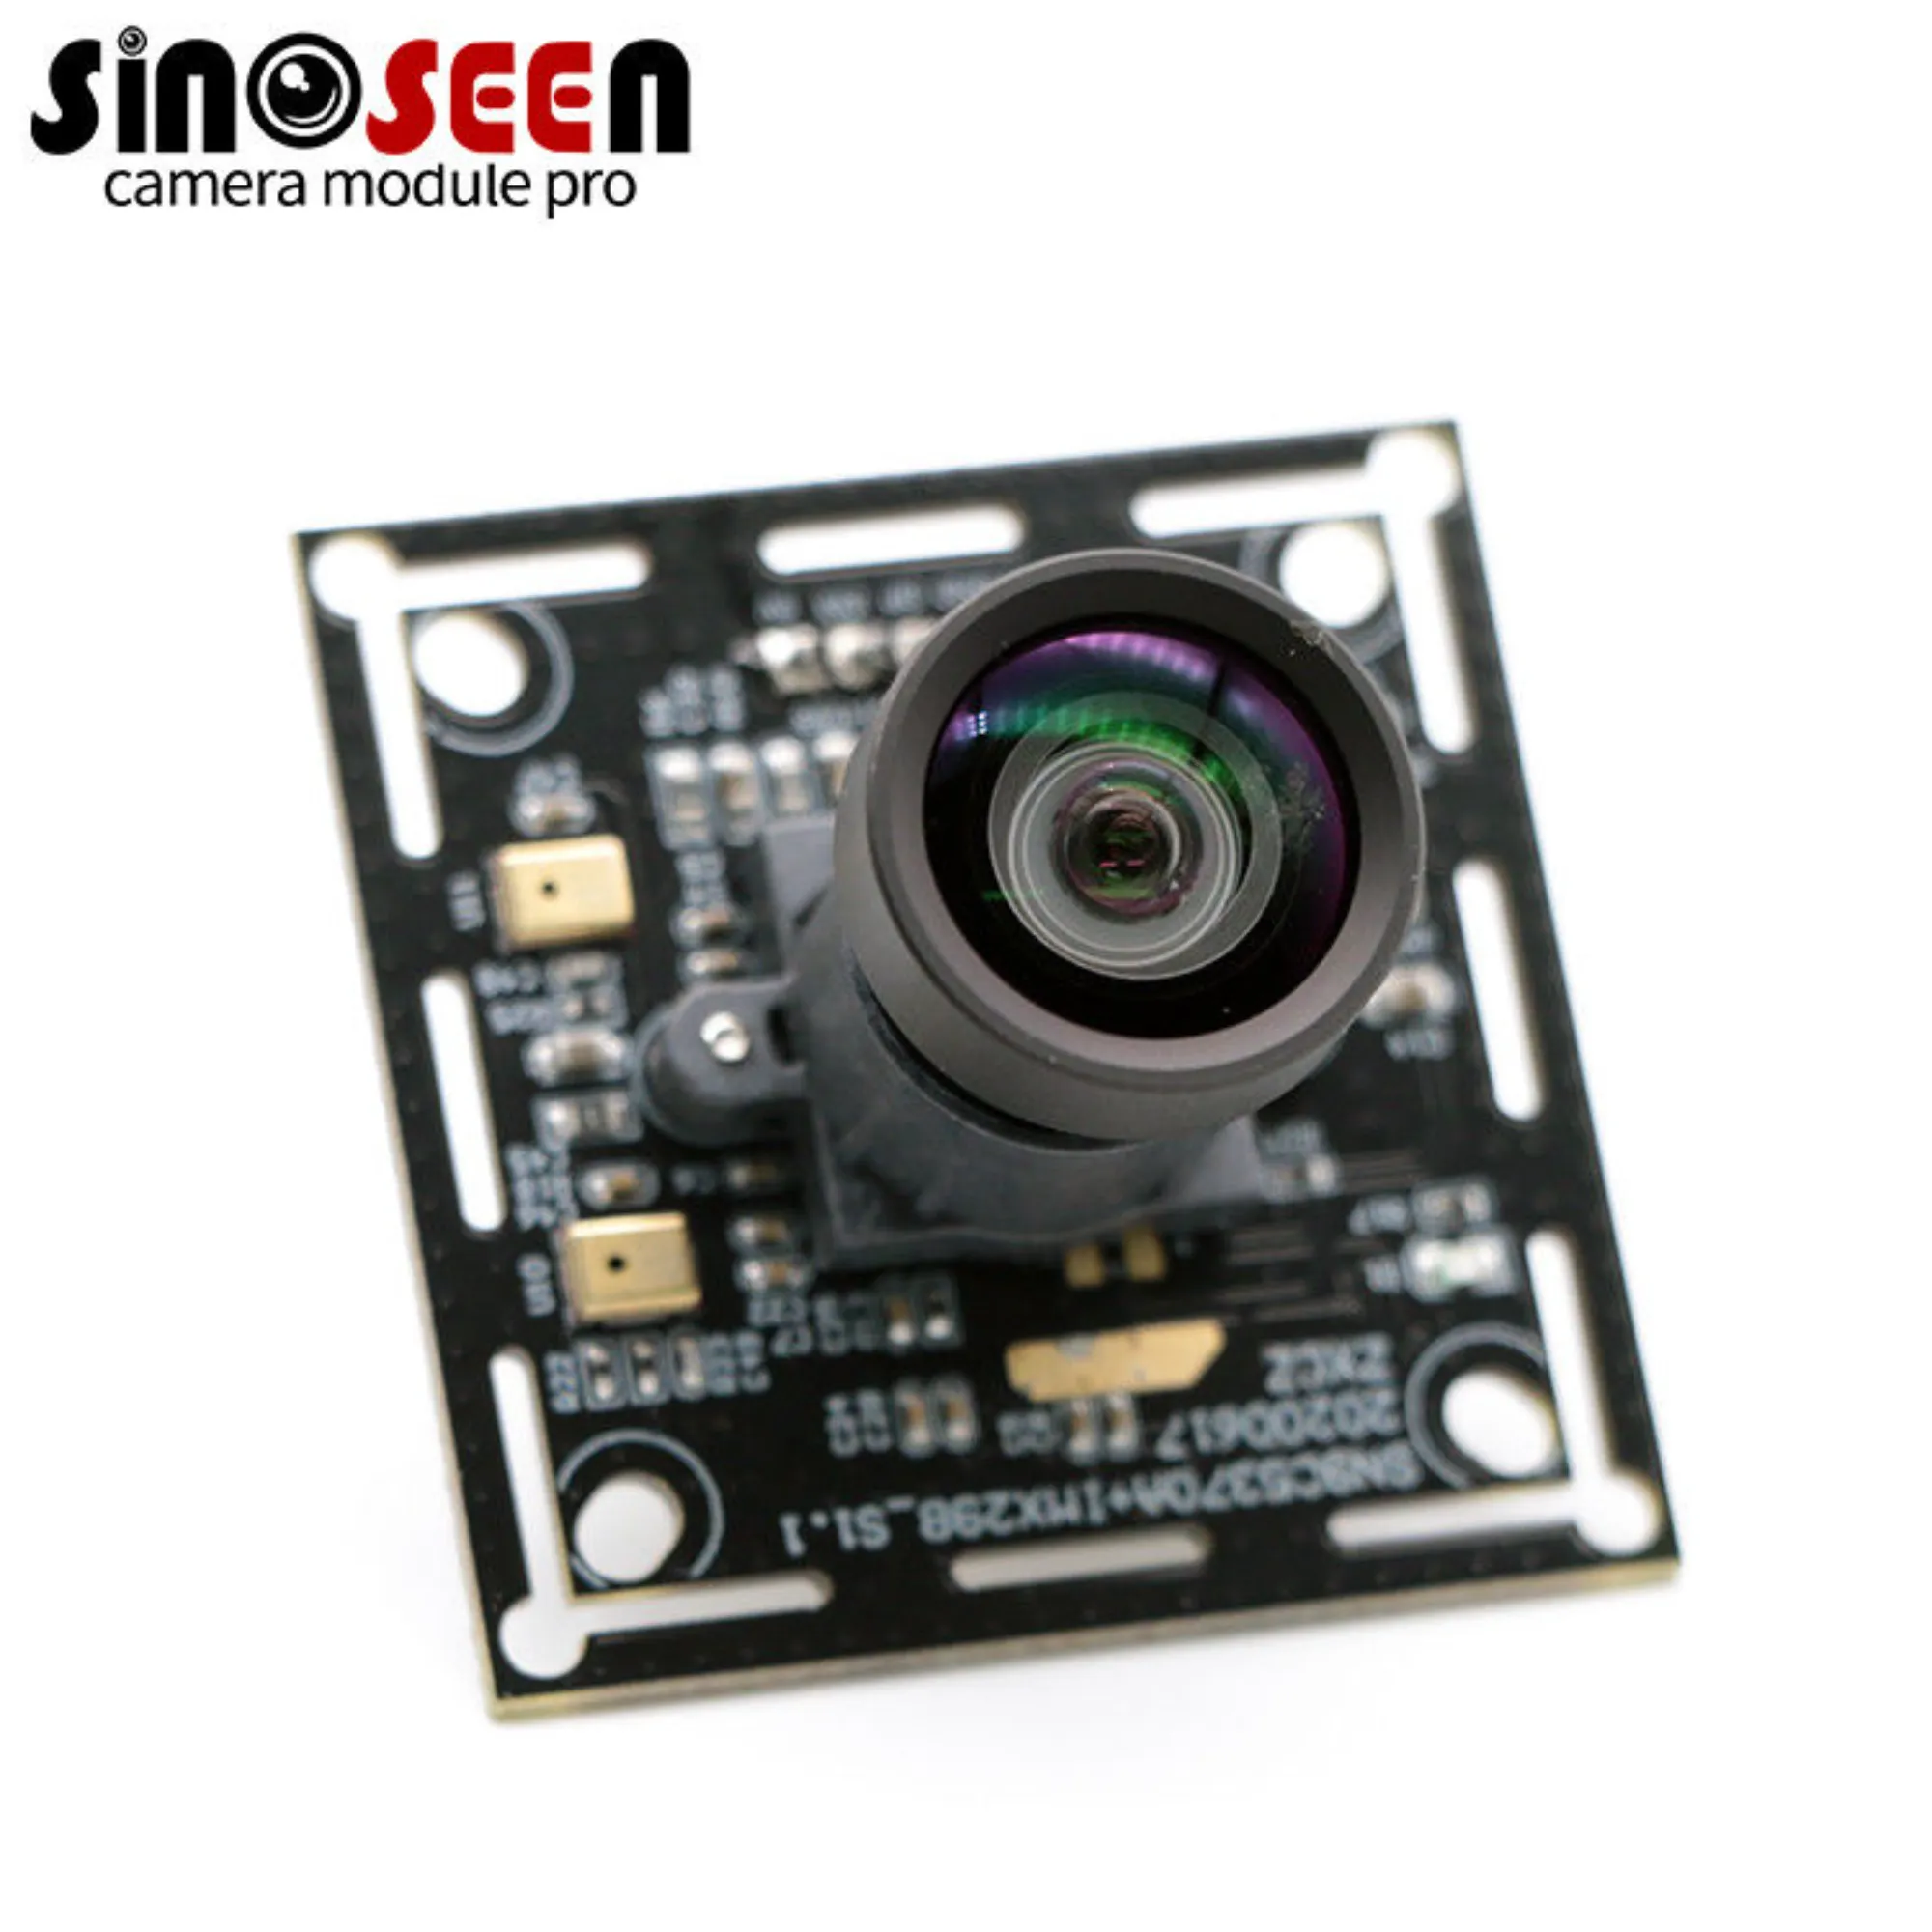 OEM OV2735 Fixed Focus Lens USB Camera Modules Wide Angle 2MP 1080P 30FPS HDR